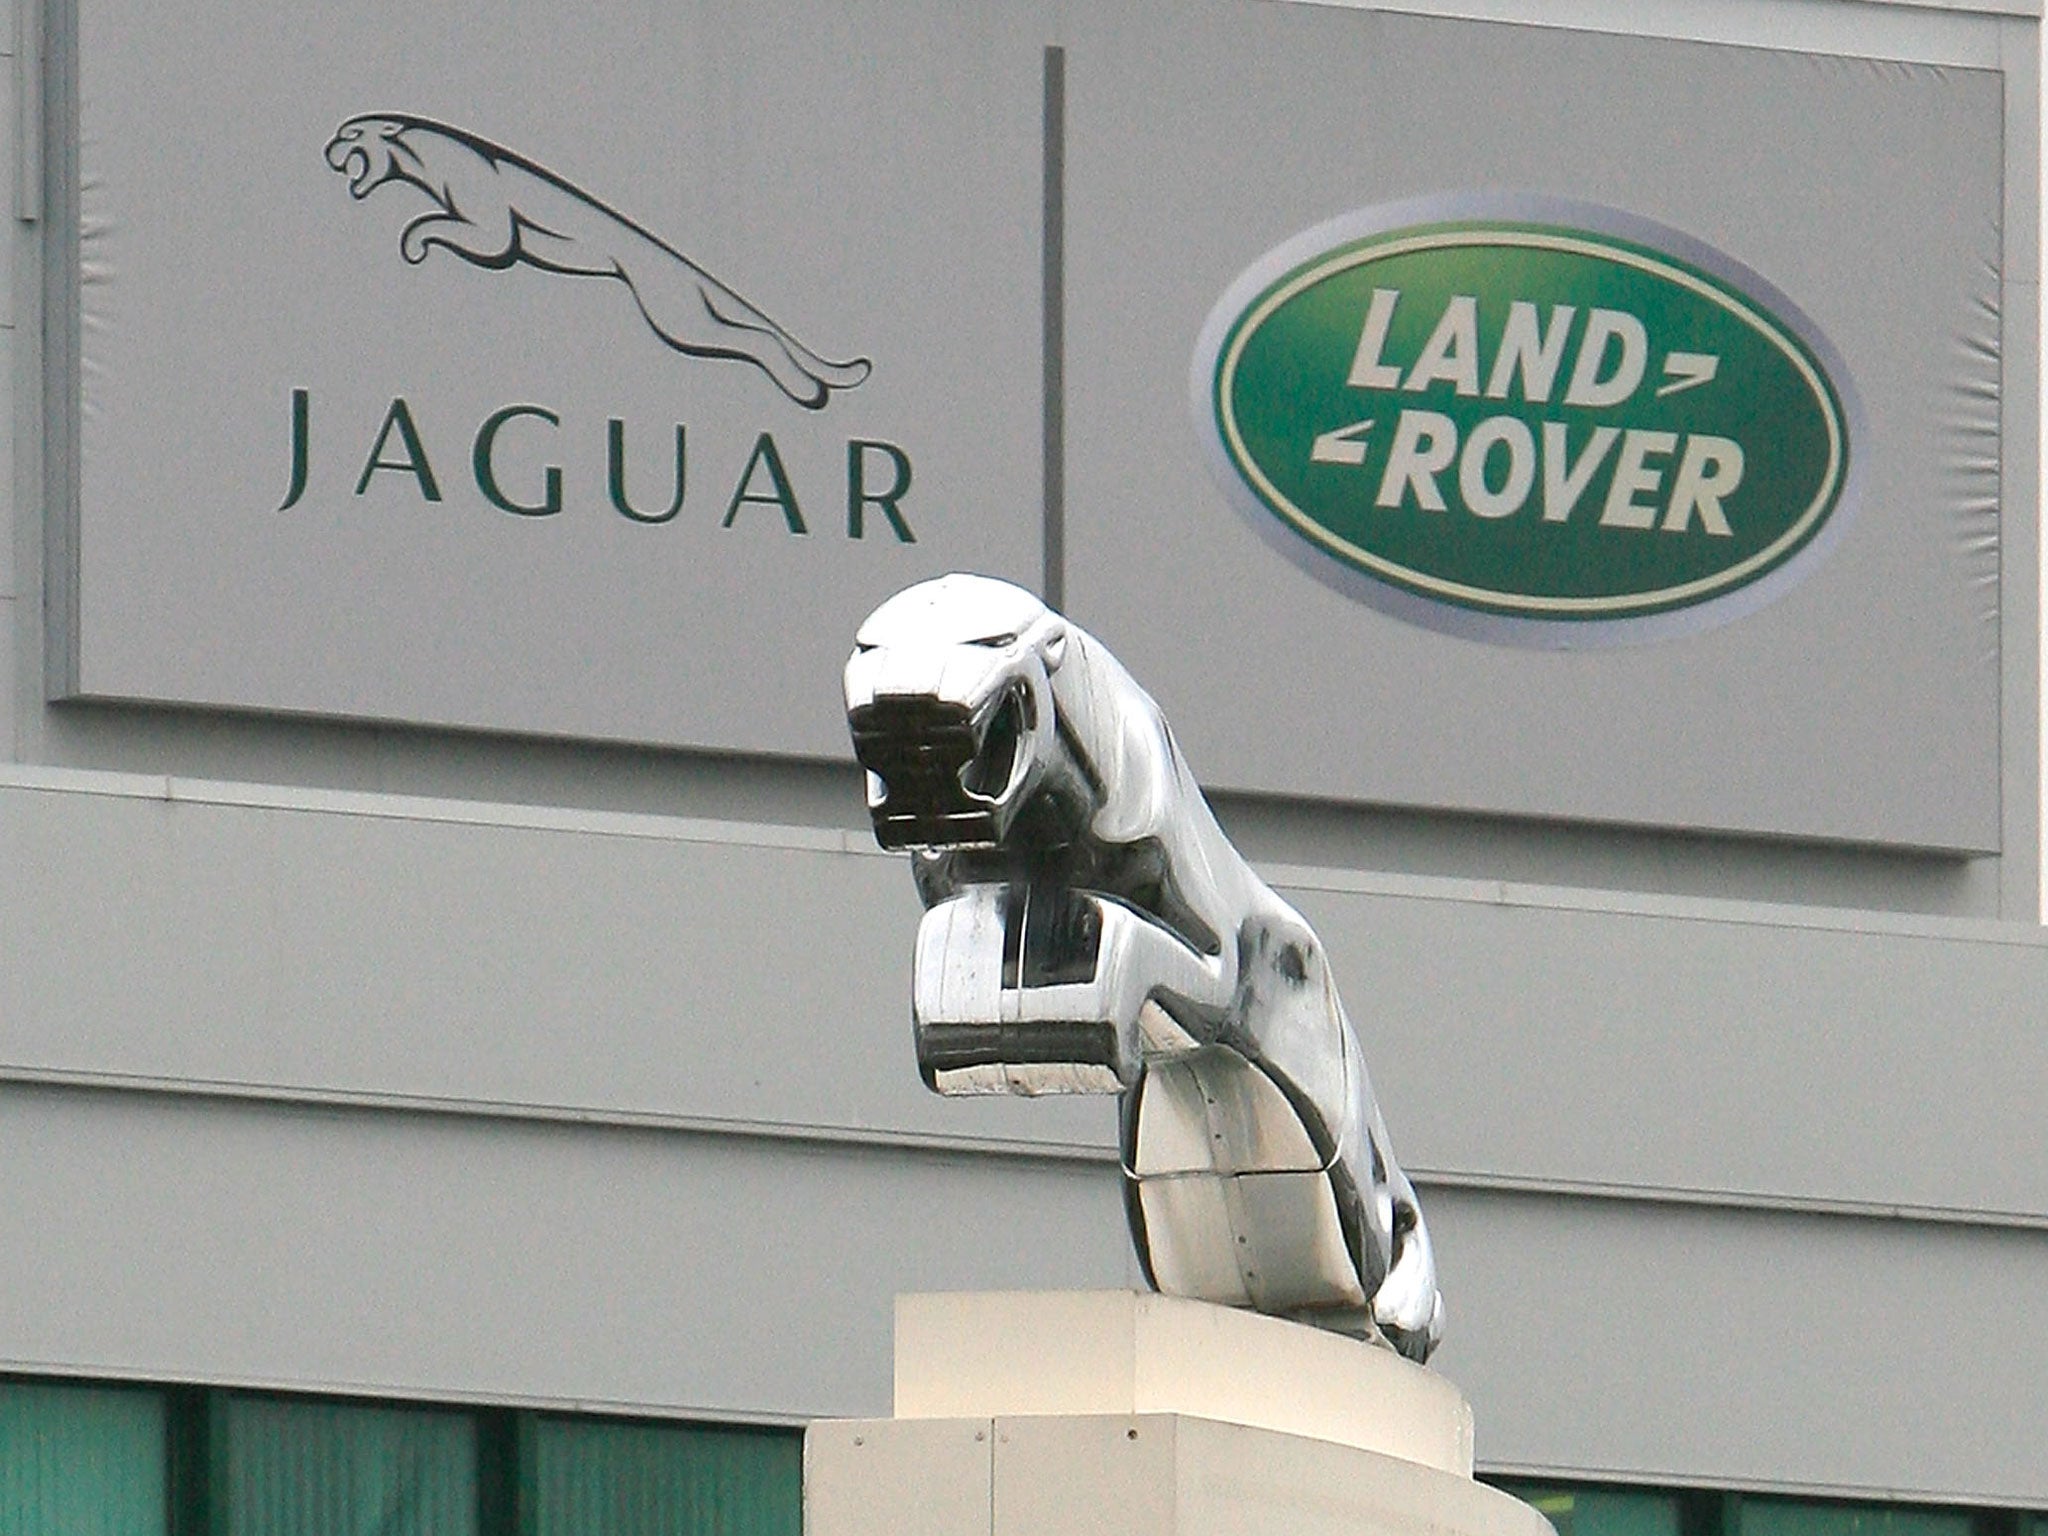 JLR, which has a turnover of £19.4 billion a year, has enjoyed strong growth around the globe, more than doubling its sales over the last five years